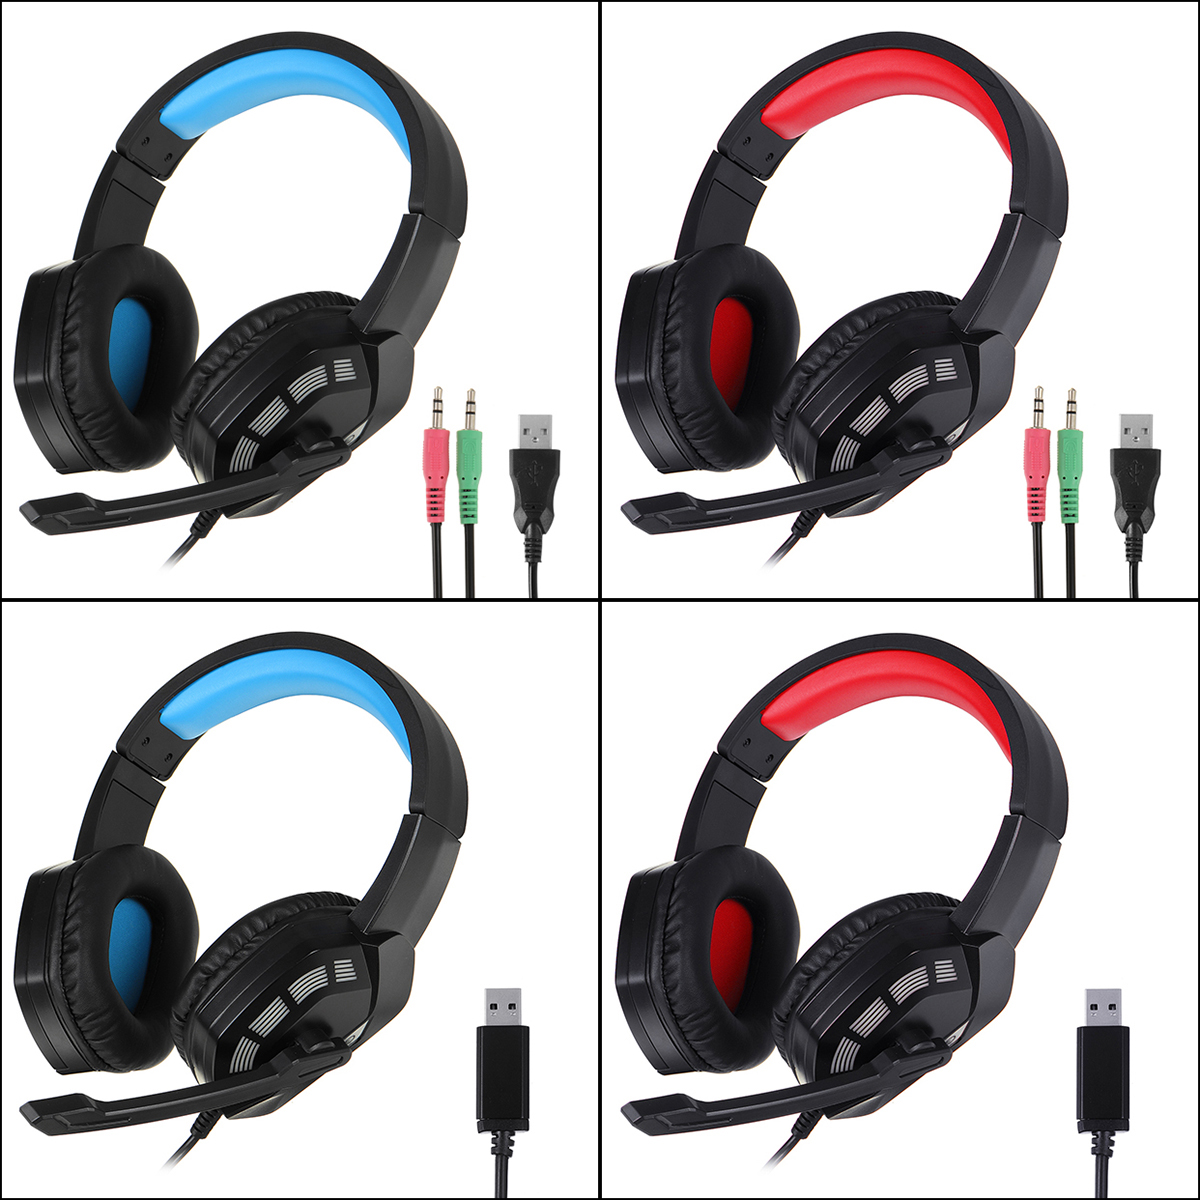 M1-Gaming-Headset-Surround-Sound-Music-Earphones-USB-71--35mm-Wired-RGB-Backlight-Game-Headphones-wi-1827492-20